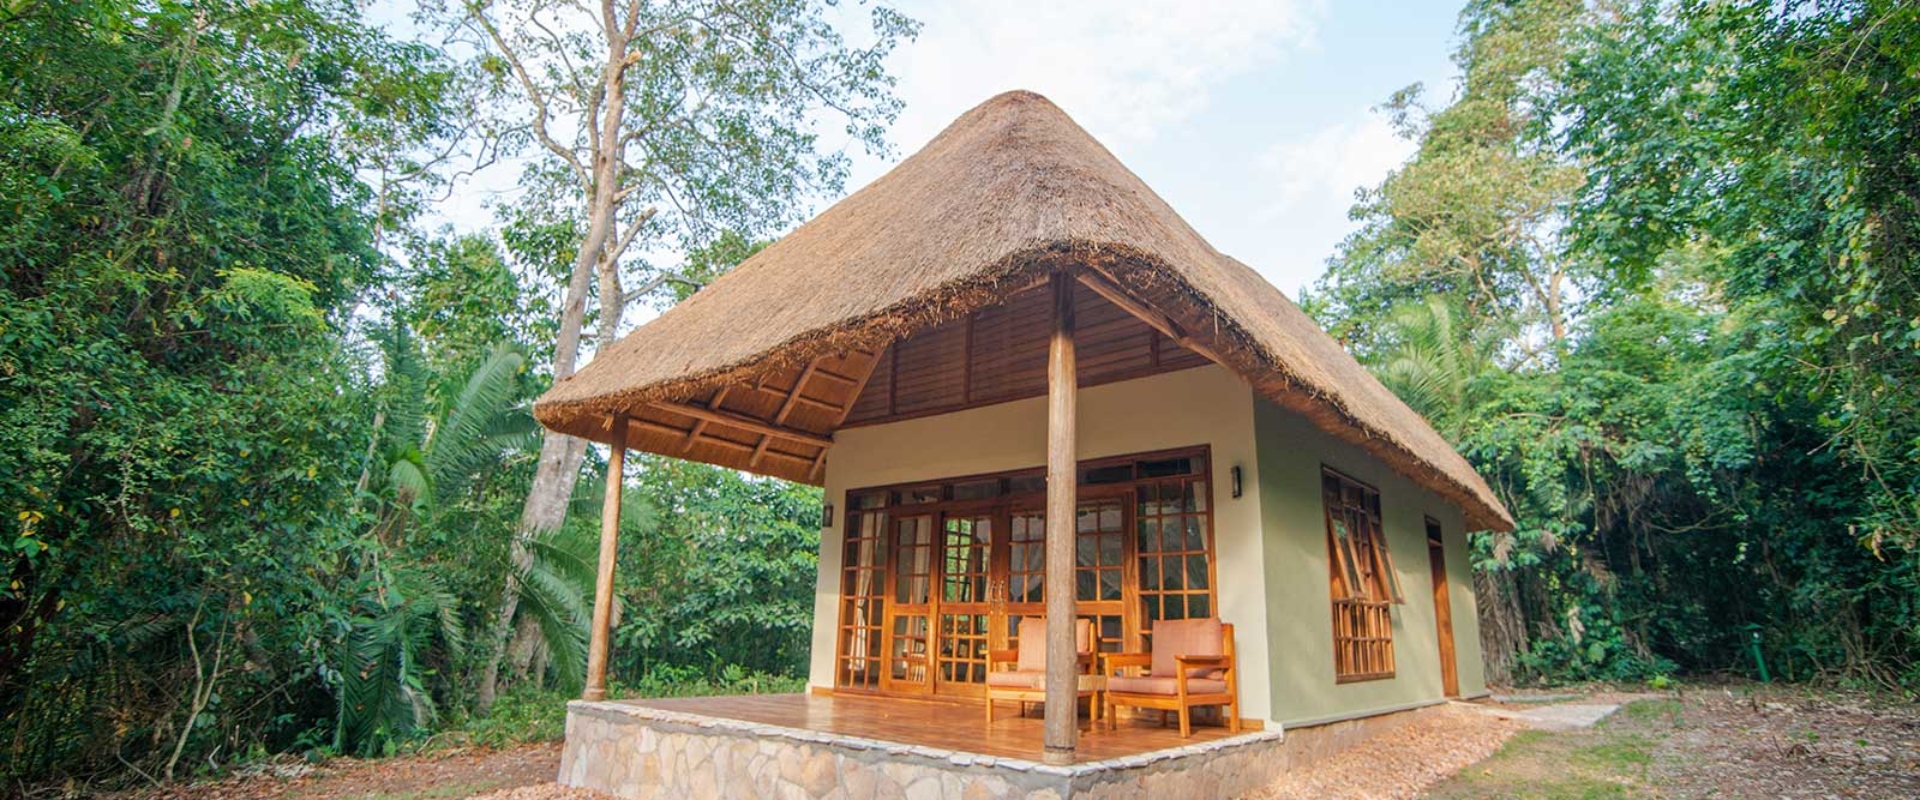 Primate Lodge Kibale Guest Room Exterior View Day